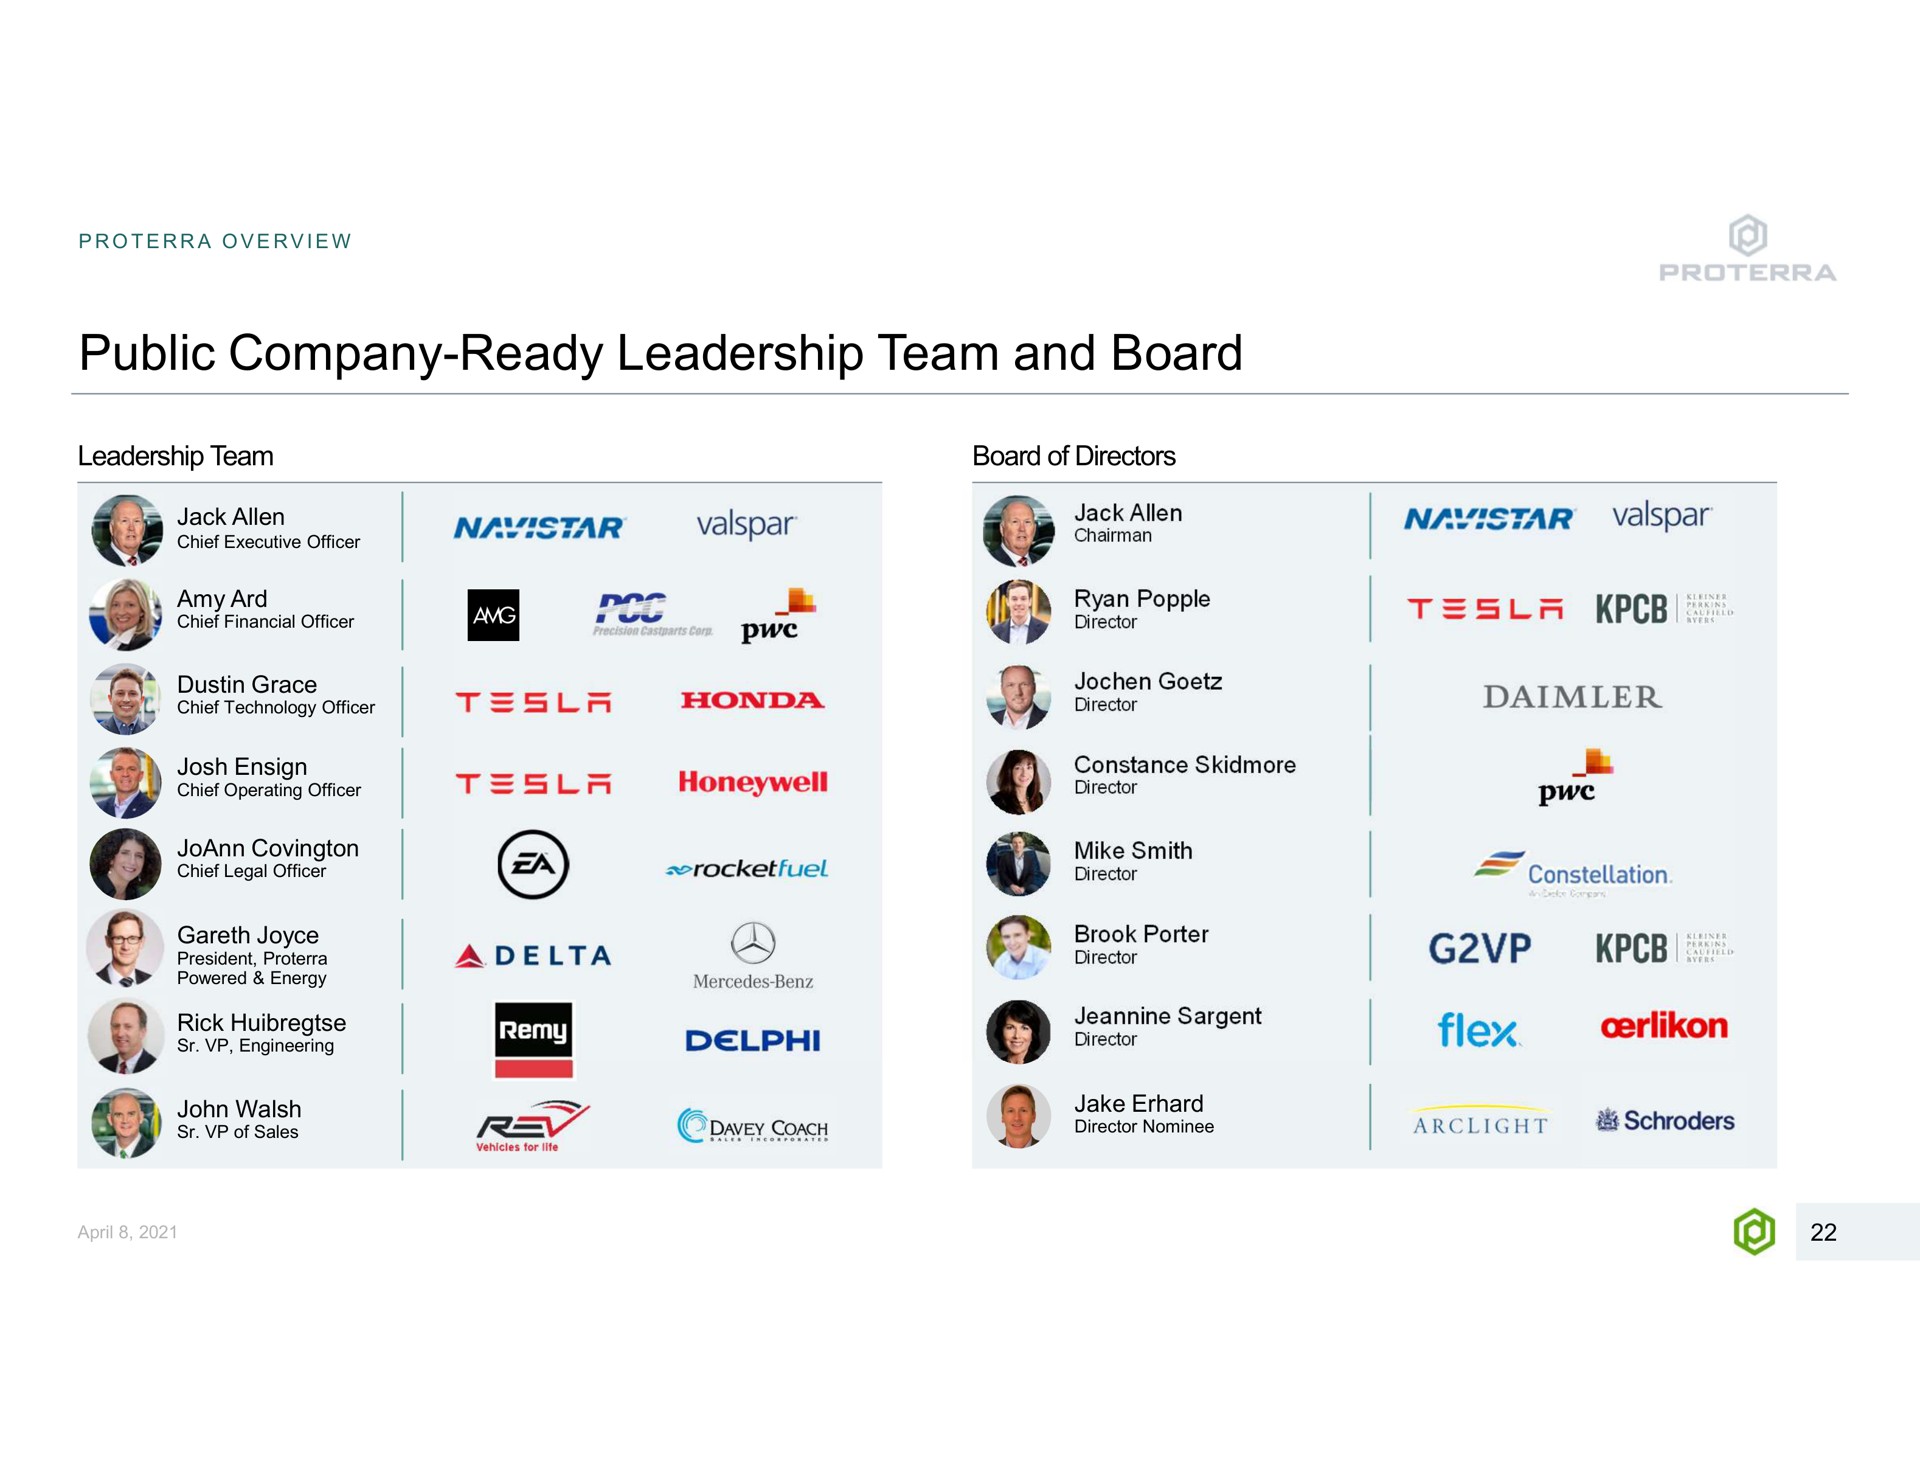 public company ready leadership team and board overview or jack chief executive officer amy chief financial officer grace chief technology officer a josh ensign chief operating officer ree honda chief legal officer president powered energy rick engineering walsh of sales vehicles for life of directors jack chairman popple director director director mike smith director constellation brook porter director director flex jake director nominee | Proterra